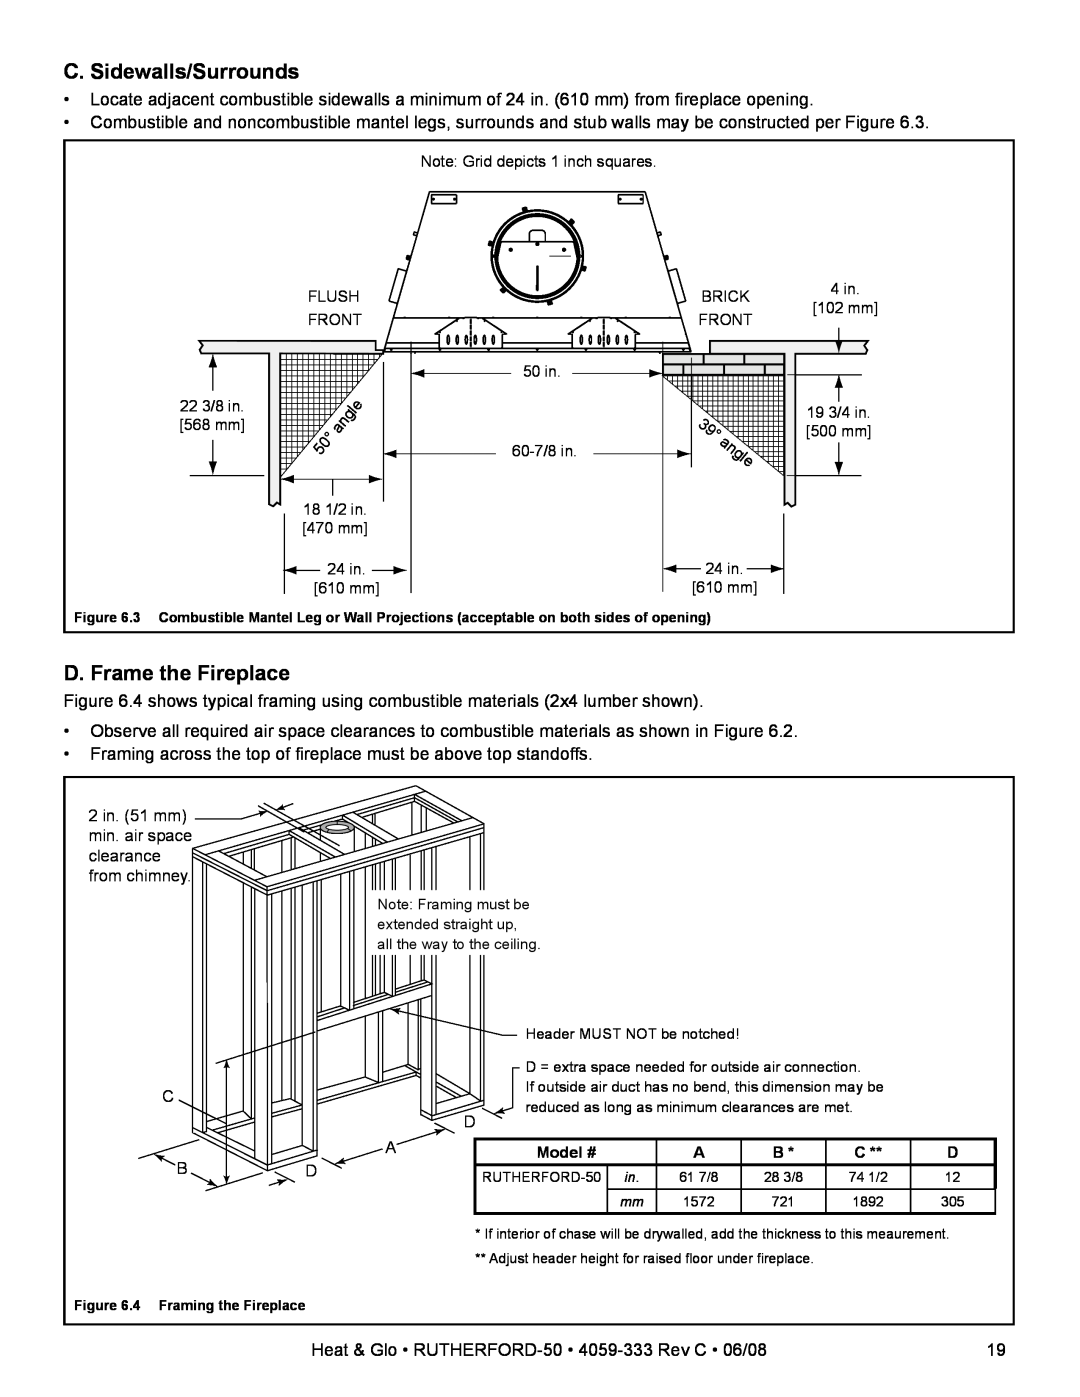 Heat & Glo LifeStyle 50 owner manual angle, C. Sidewalls/Surrounds, D. Frame the Fireplace 